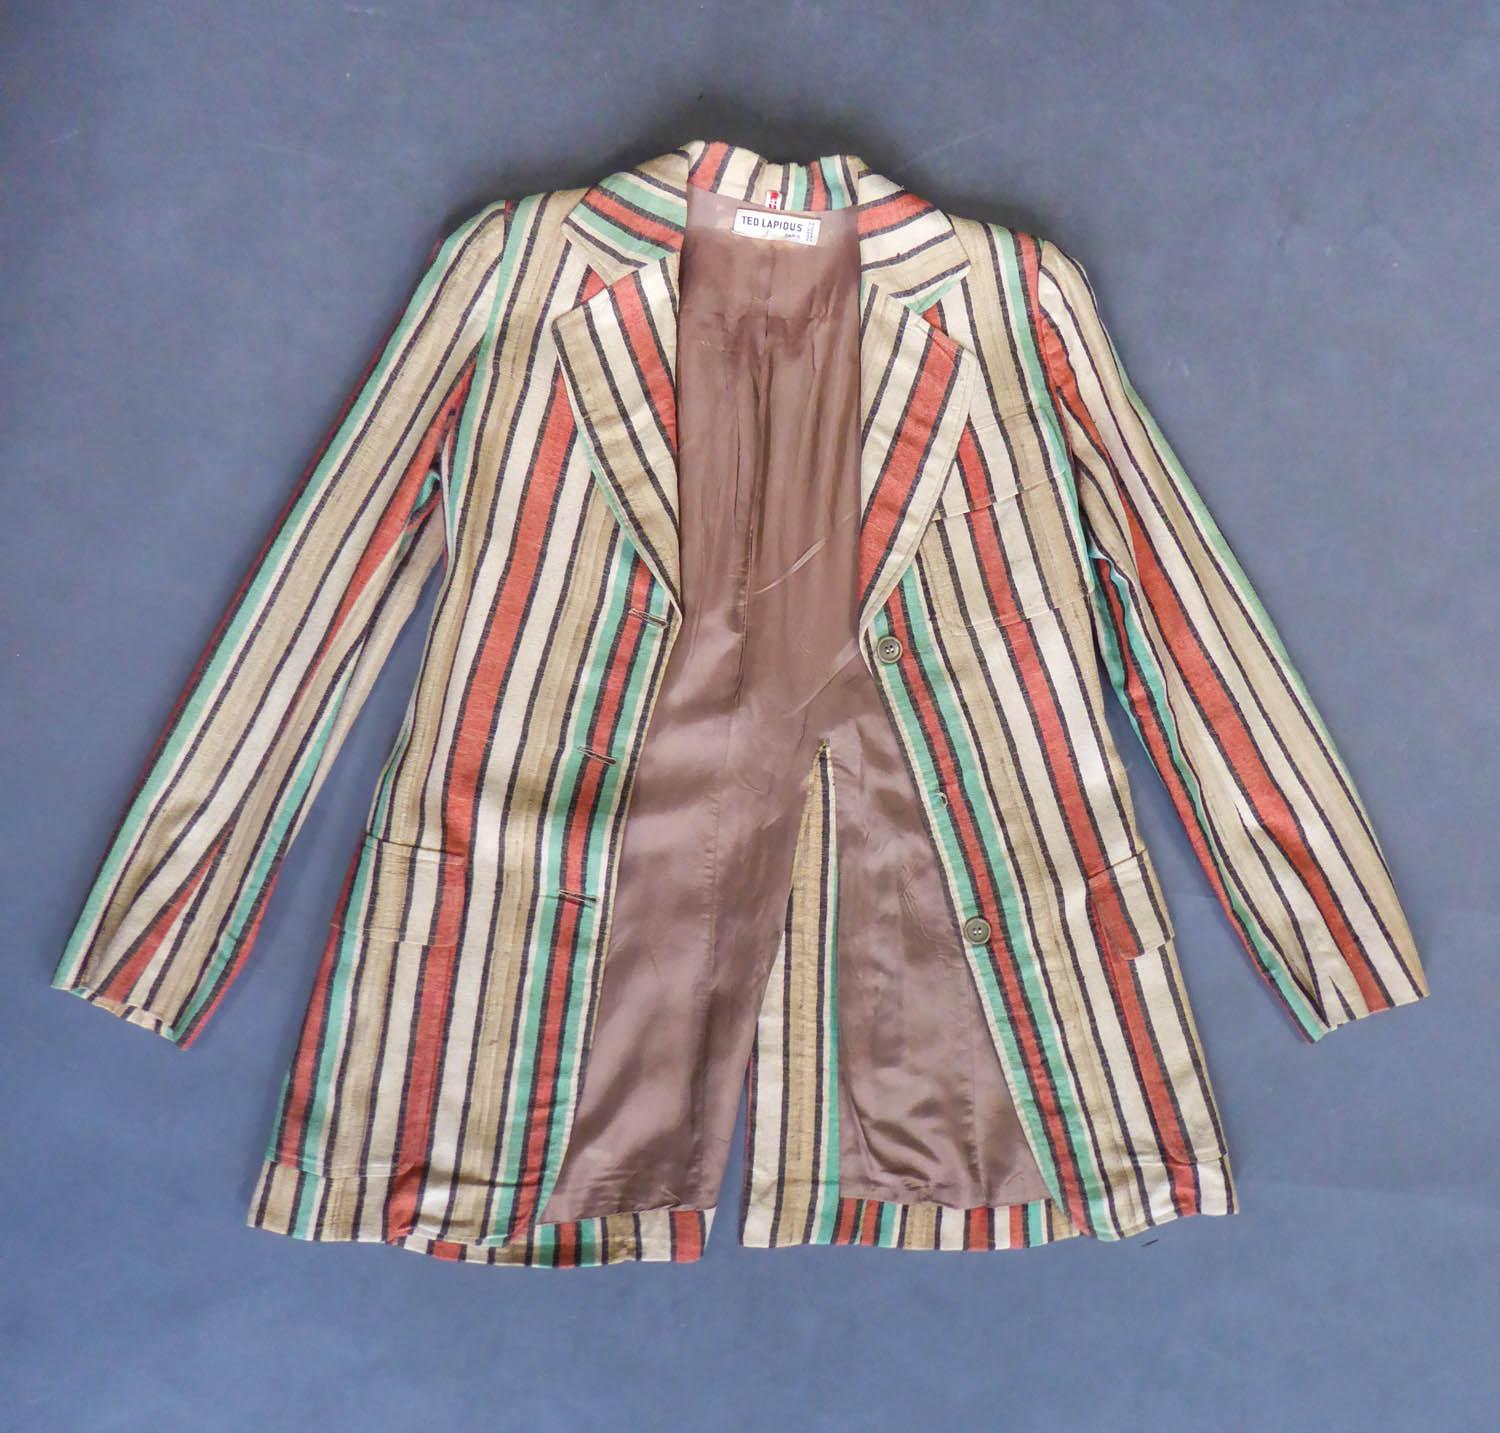 Circa 1975
France

Ted Lapidus jacket in raw silk striped in shades of turquoise, orange, cream and brown. Slim fit with wide collar, three real front pockets, pleated in the back with large sewn belt. Closure at the front with buttons the same as